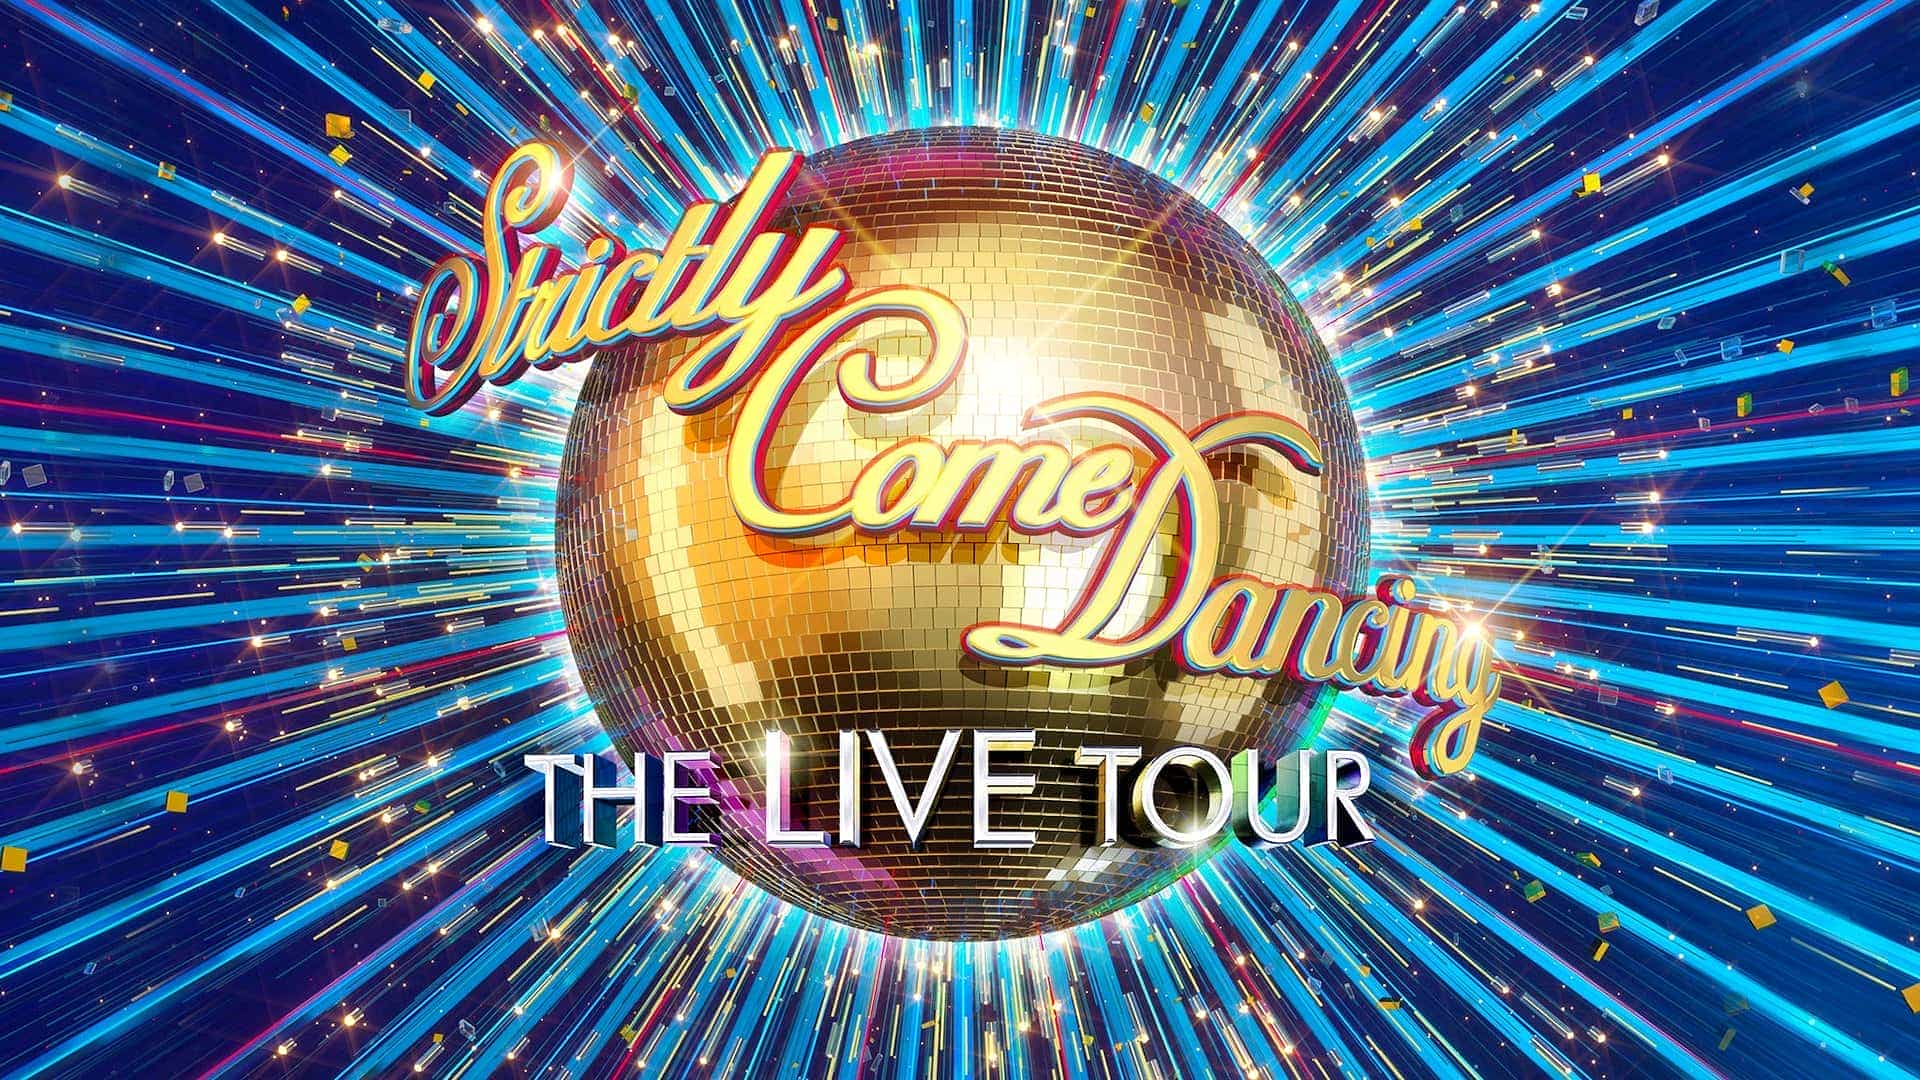 Strictly Come Dancing - The Live Tour